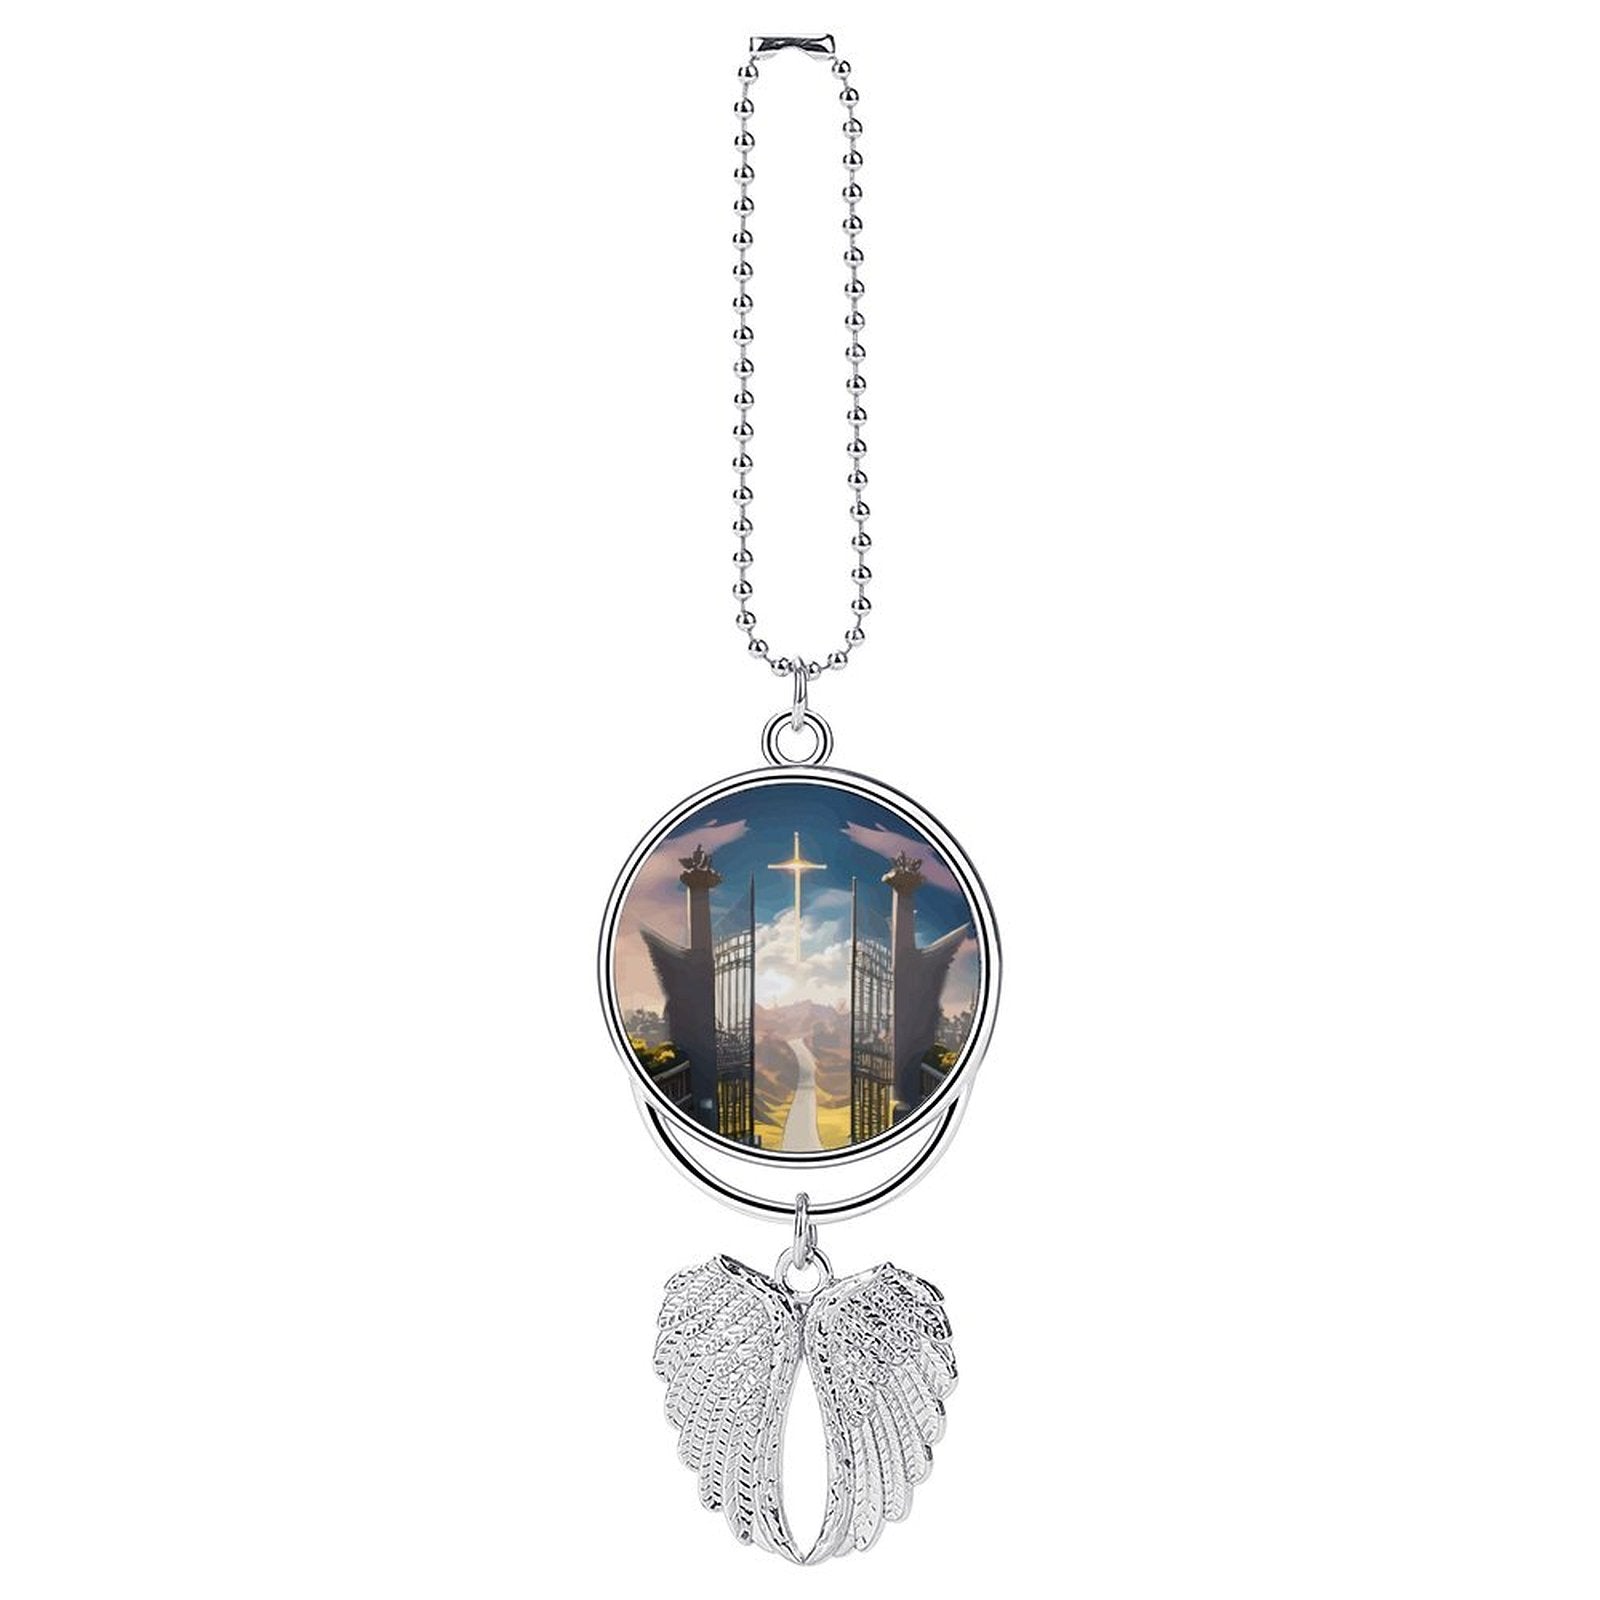 Gates of Heaven Zinc Alloy 2-sided Print Car Pendant with Wings